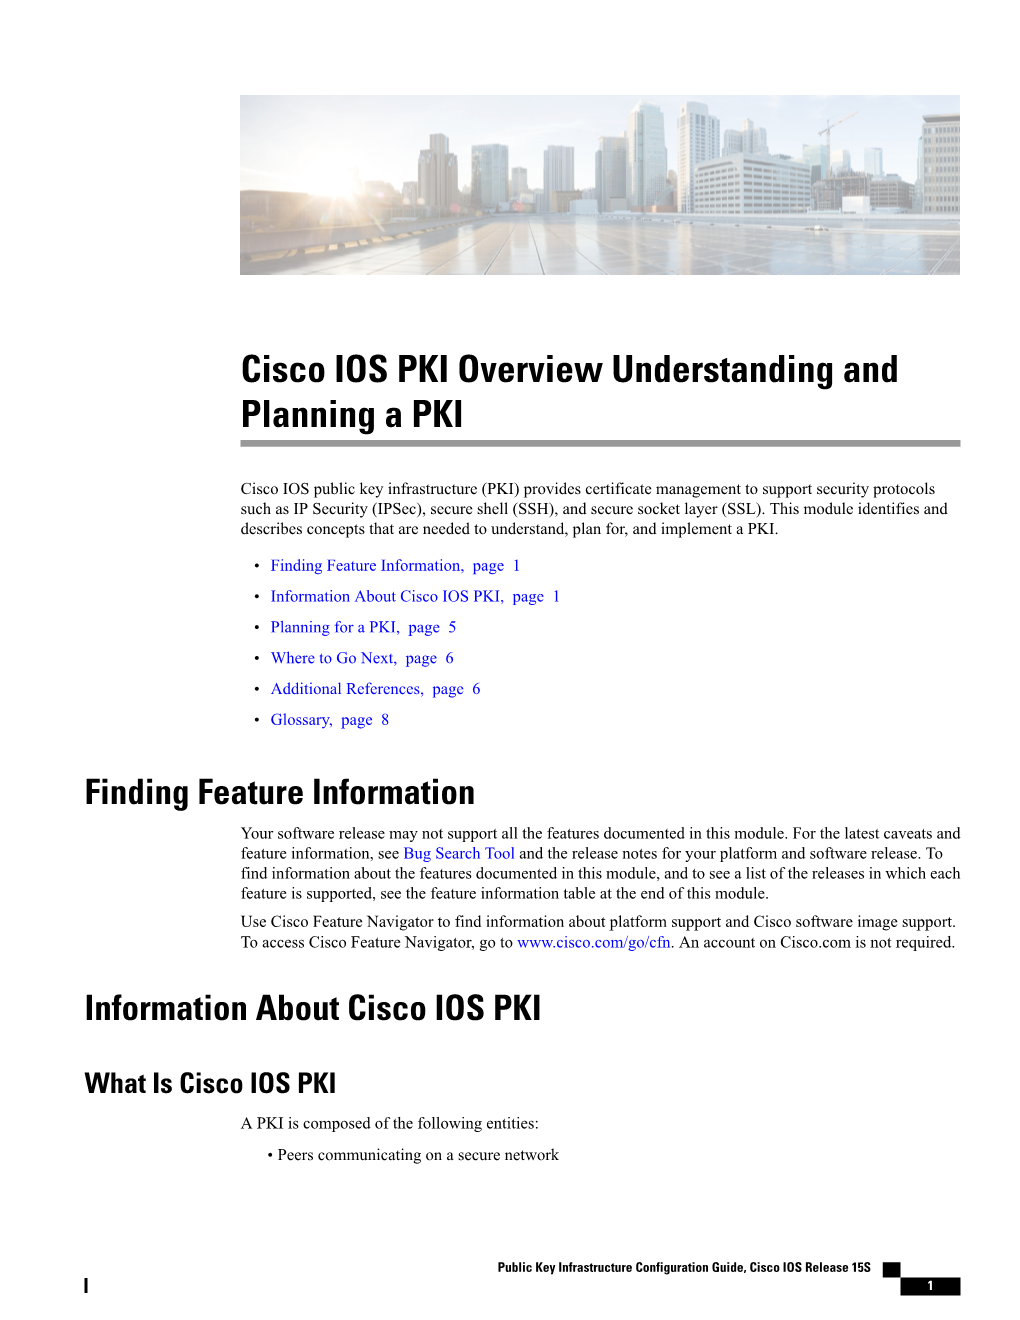 Cisco IOS PKI Overview Understanding and Planning a PKI